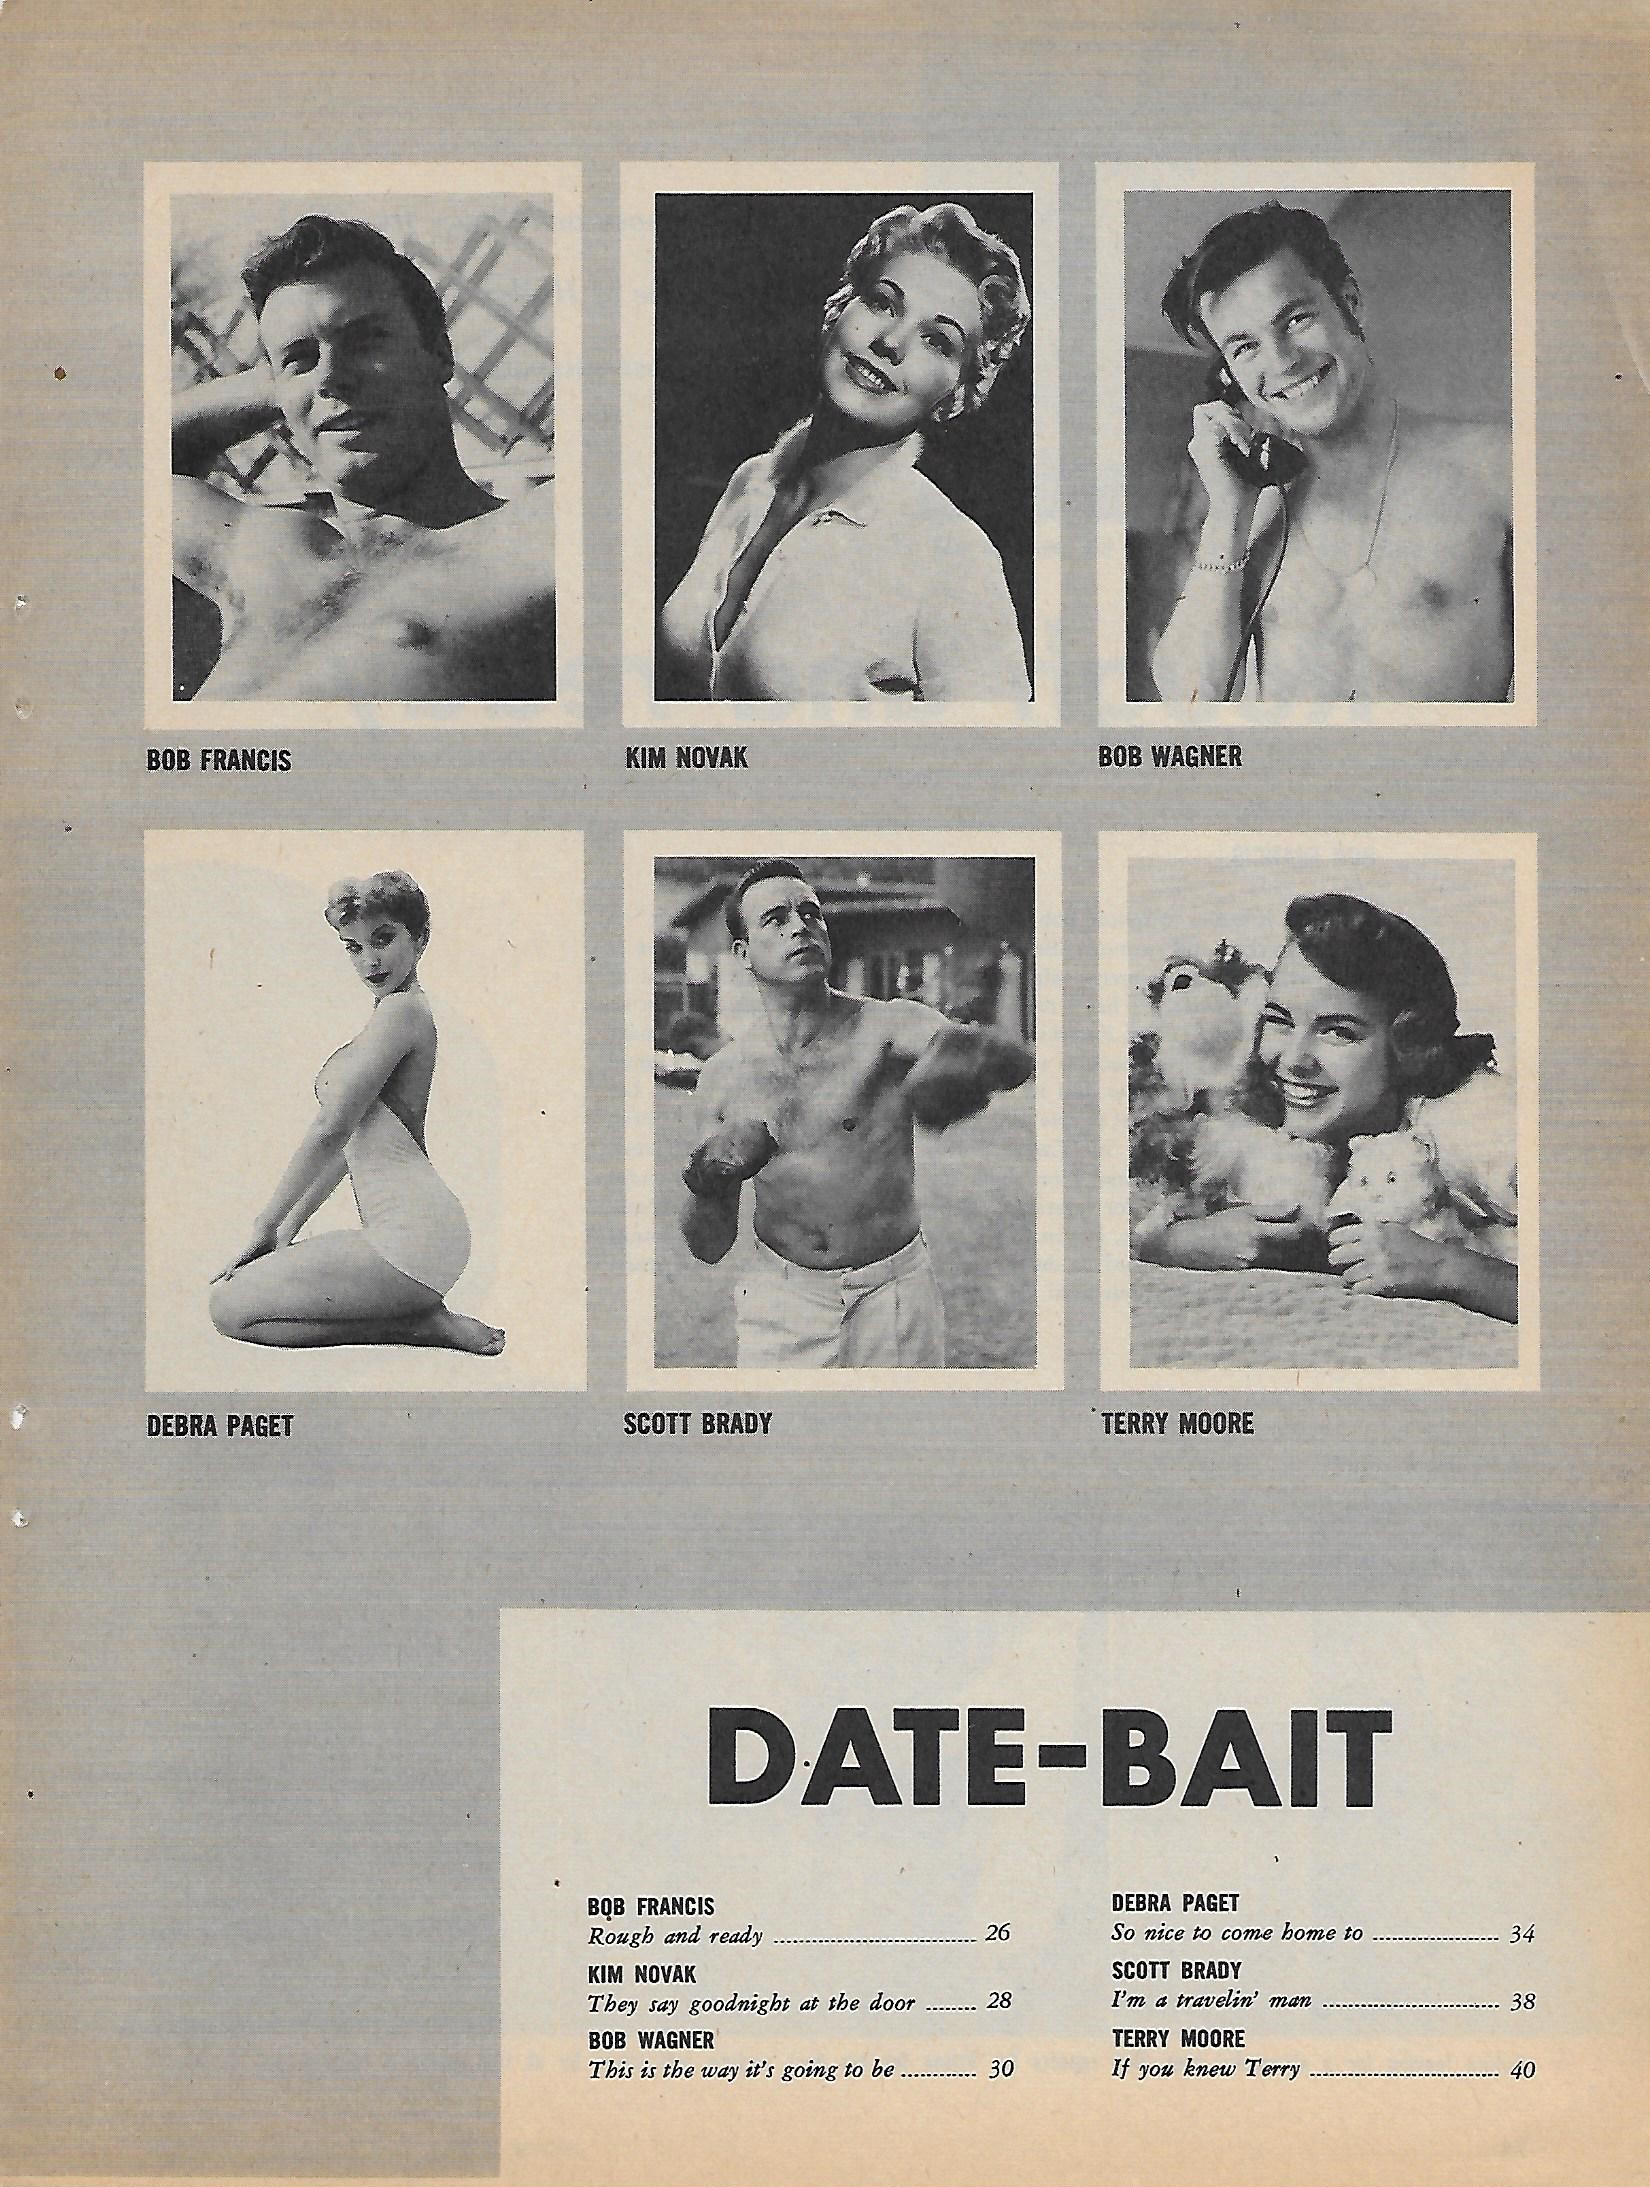   Movie Screen Star Romance Yearbook  1955 on newsstands in Spring/Summer 1955. Photos appear to have been taken Fall 1954/Winter 1955 based on haircut. The six-week tour occurred February/March 1955. 